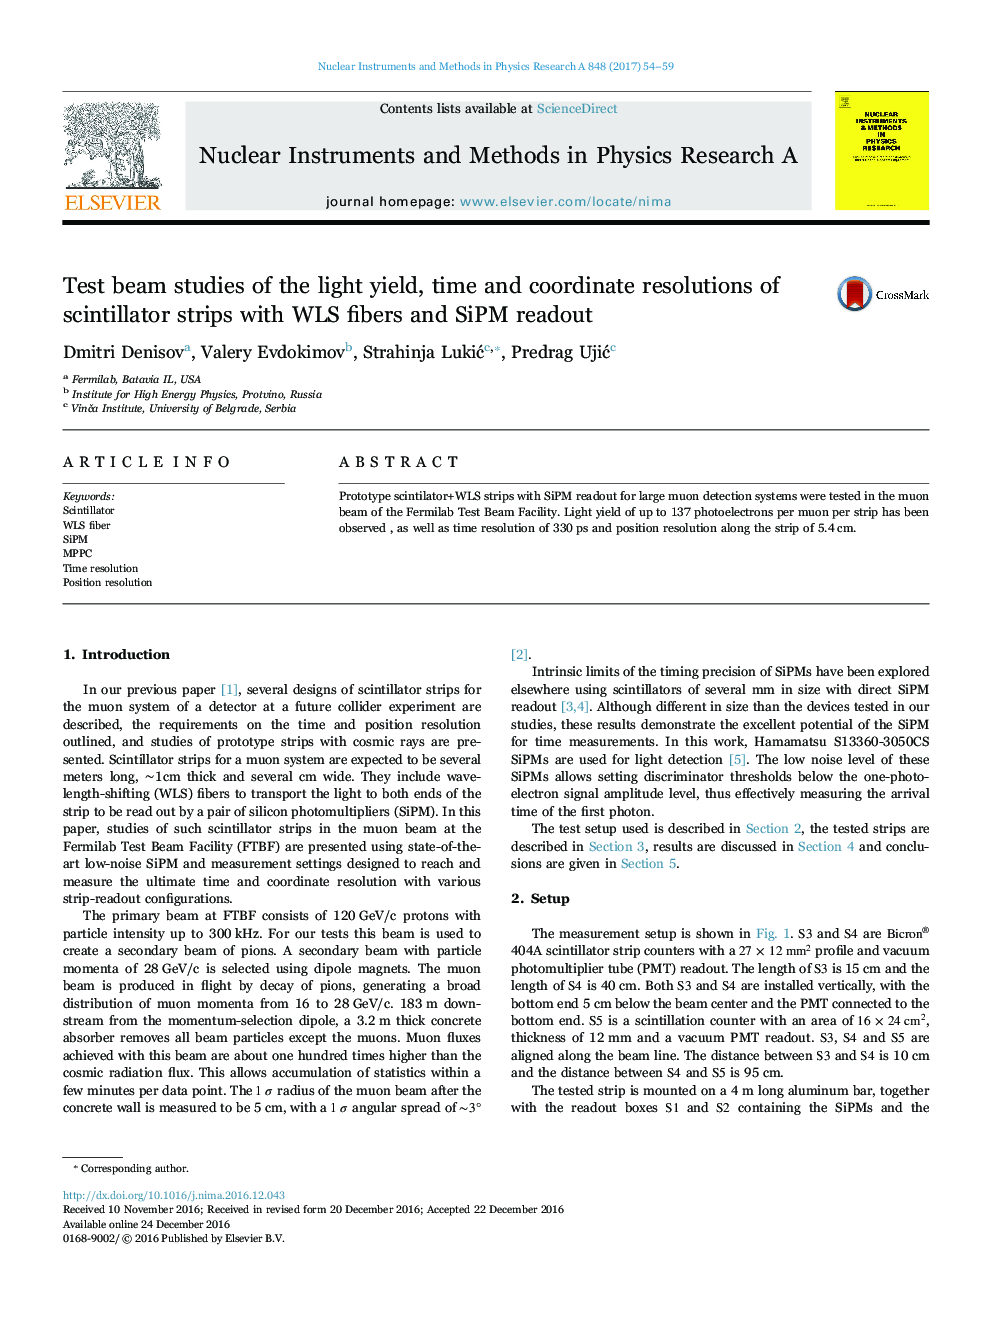 Test beam studies of the light yield, time and coordinate resolutions of scintillator strips with WLS fibers and SiPM readout